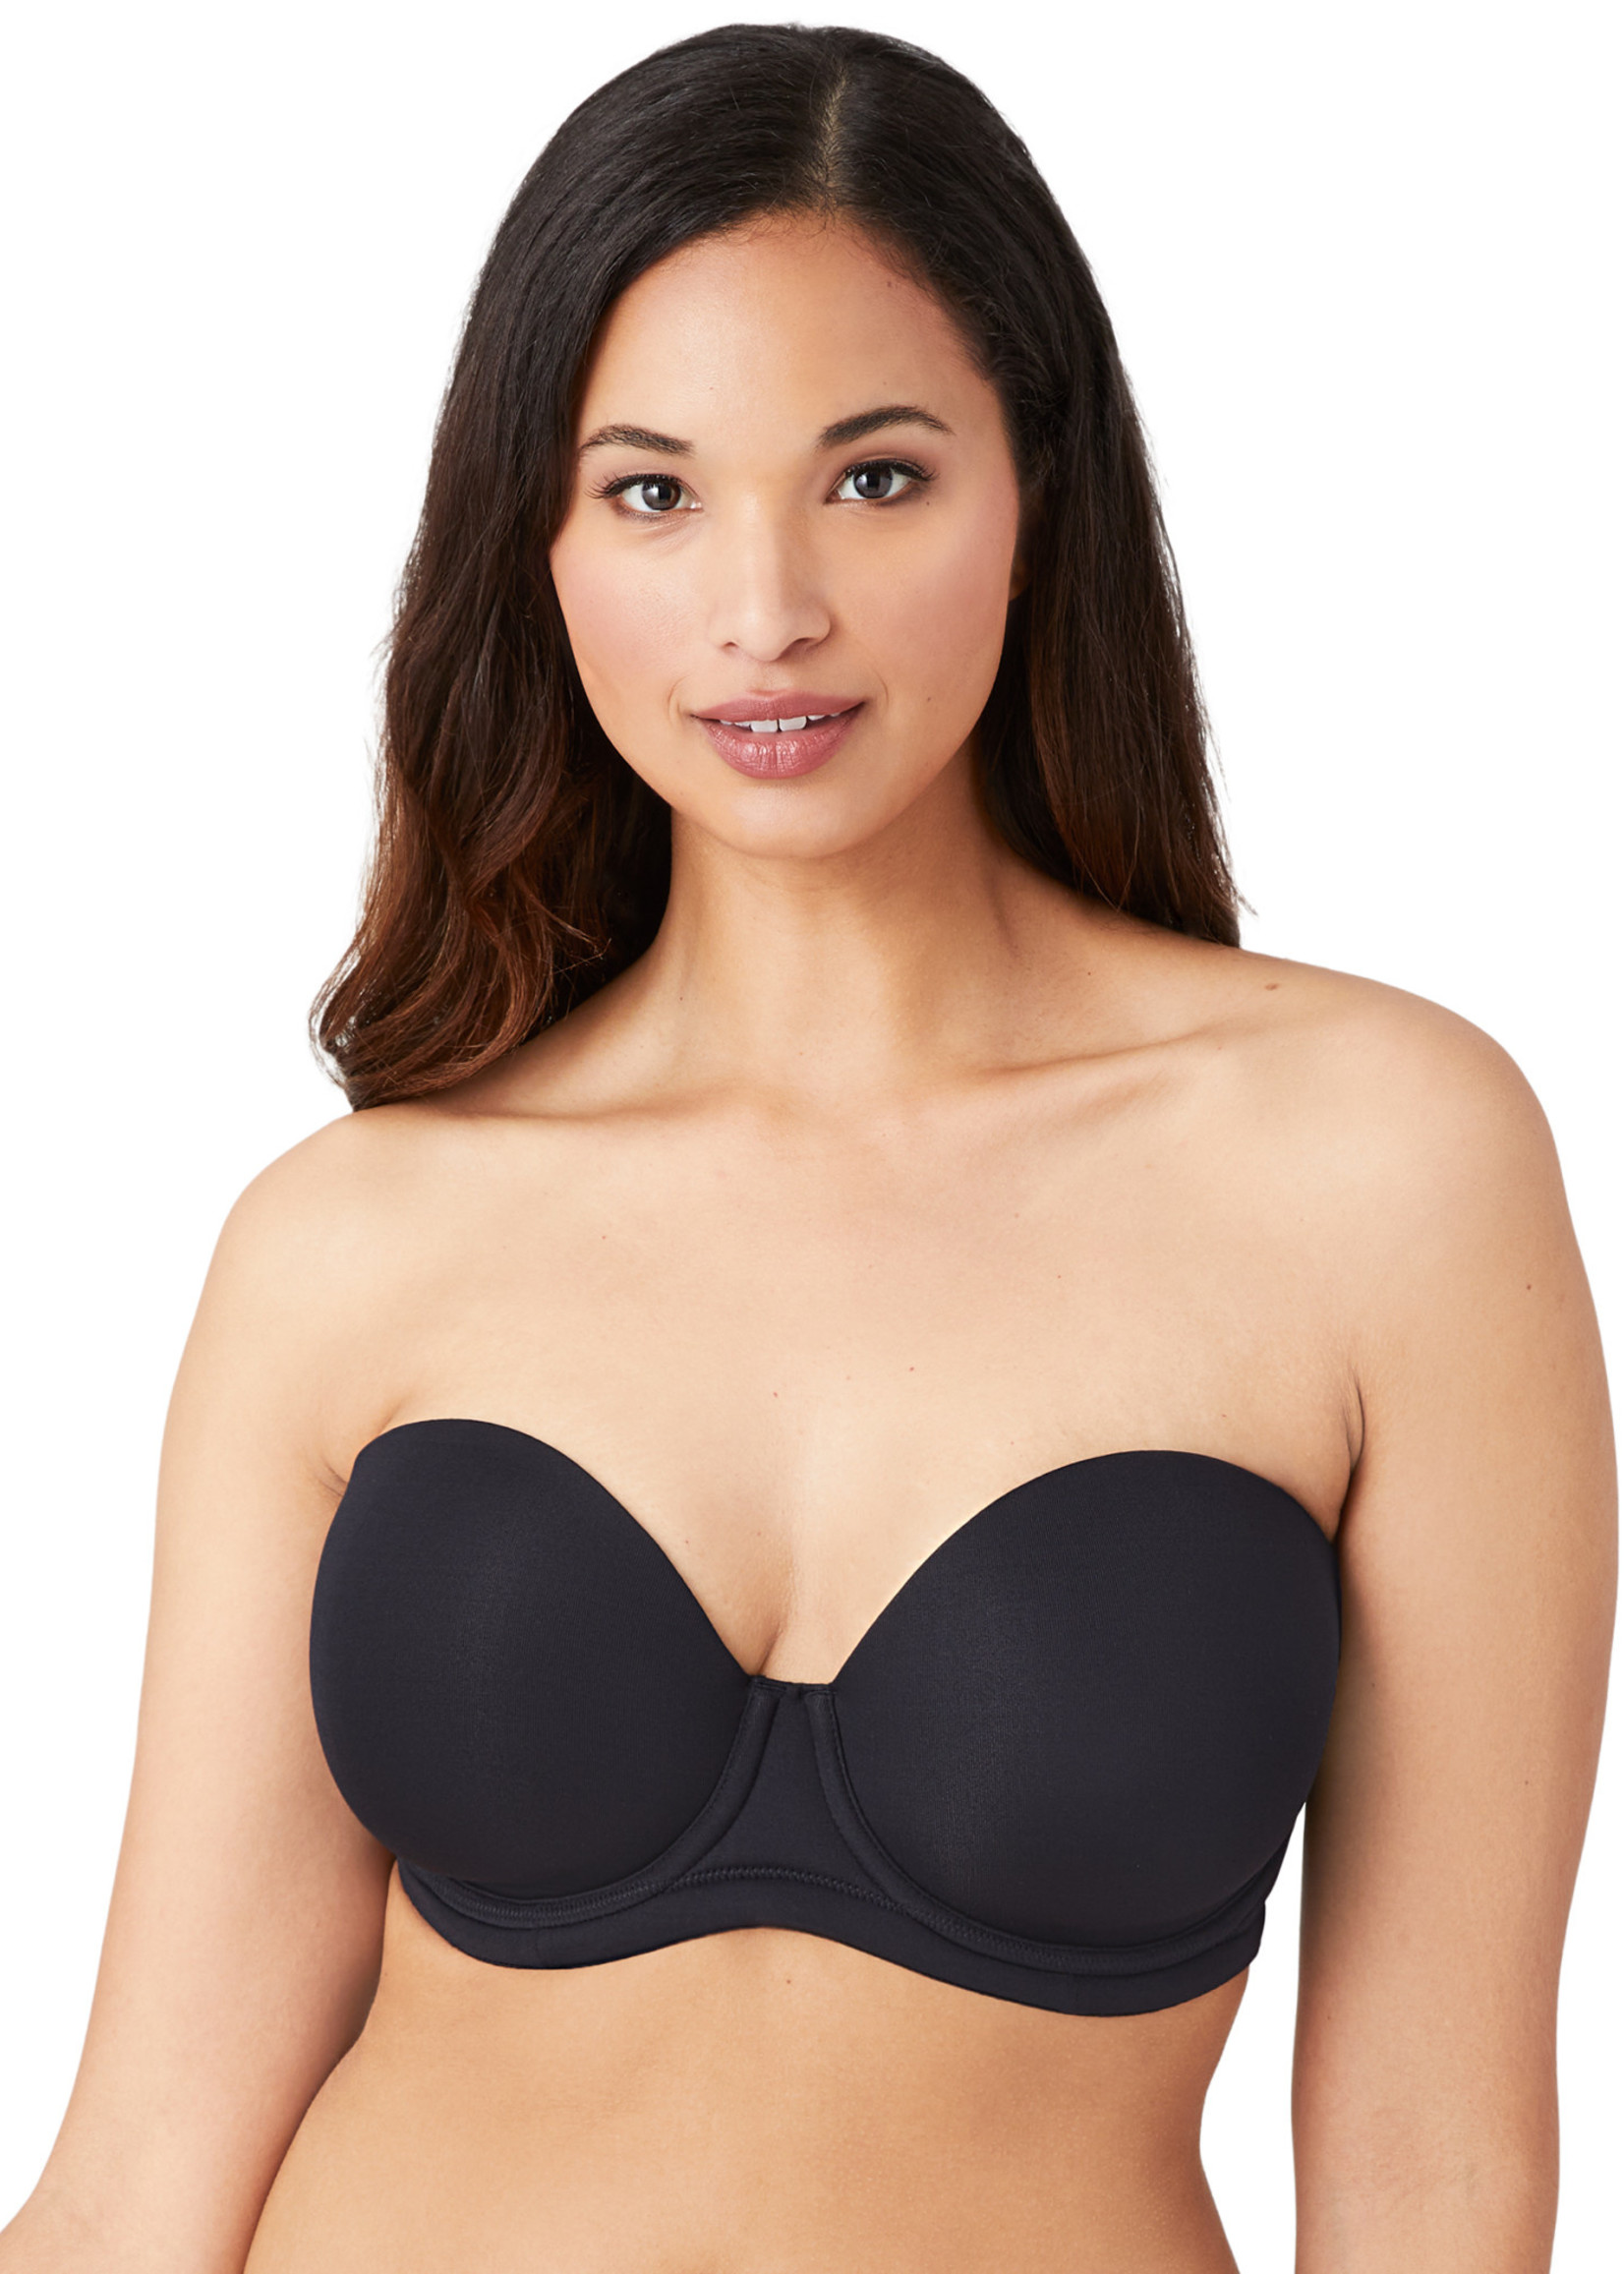 Wacoal Red Carpet Strapless Full Busted Underwire Bra - Black